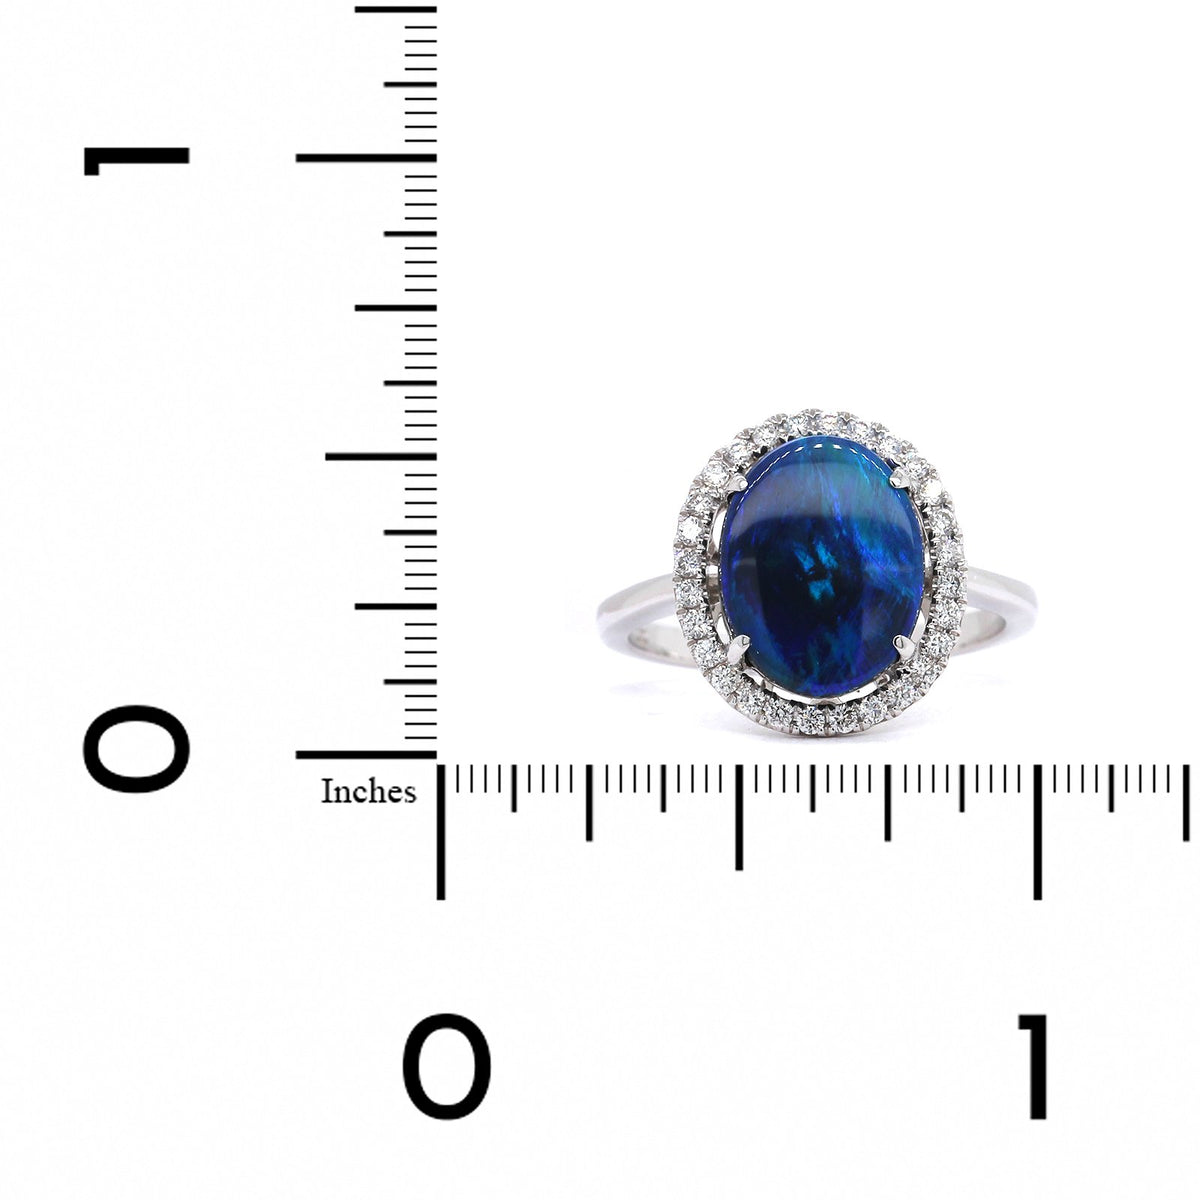 18K White Gold Oval Black Opal and Diamond Halo Ring